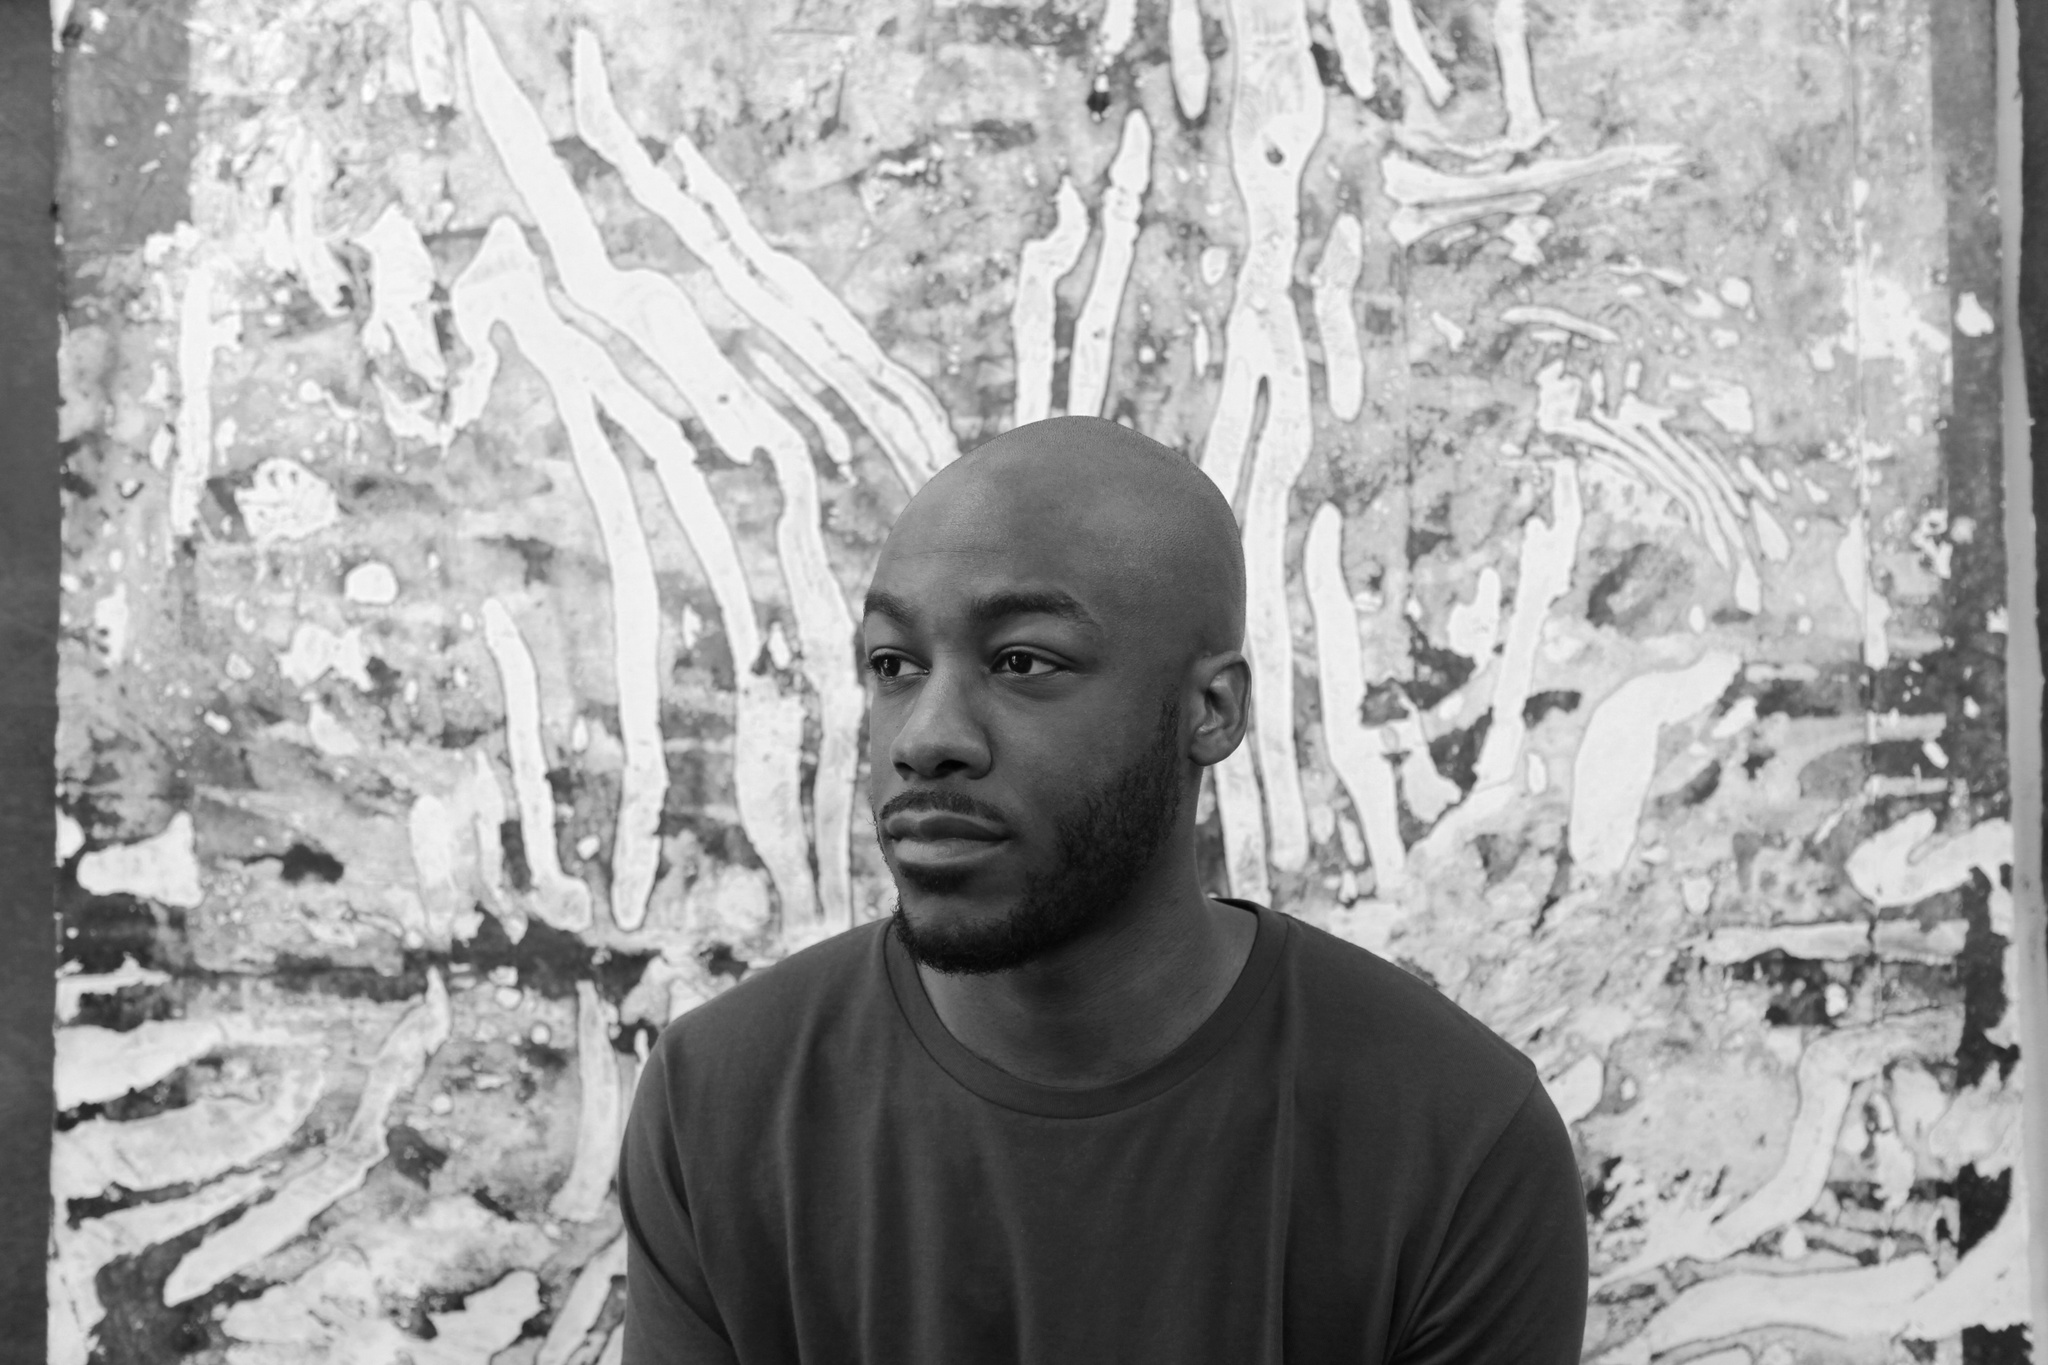 A photo of the artist Tajh Rust sitting in front of an abstract painting. Rust has a beard and looks away from the camera out of the frame of the image.